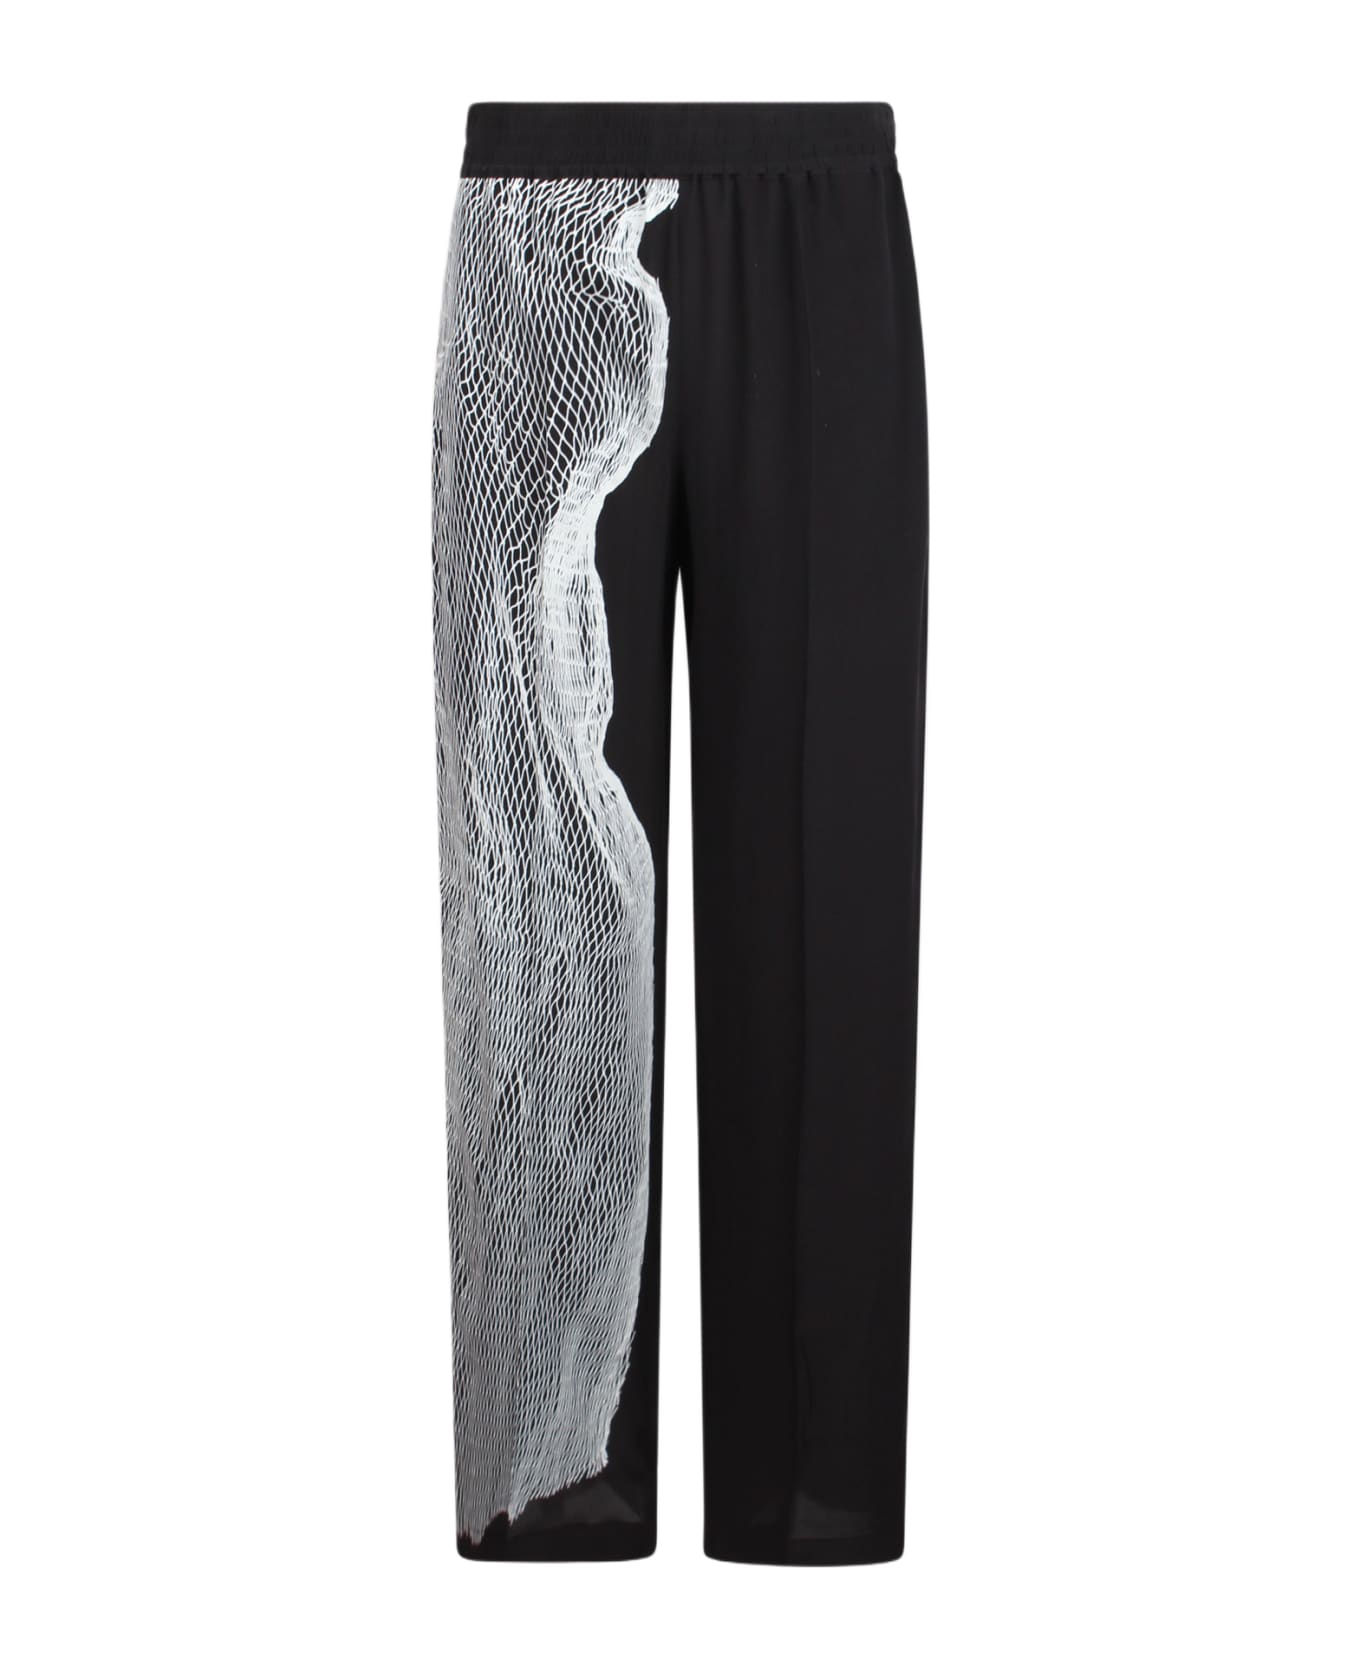 Victoria Beckham Wide-leg Trousers With Graphic Mesh Print